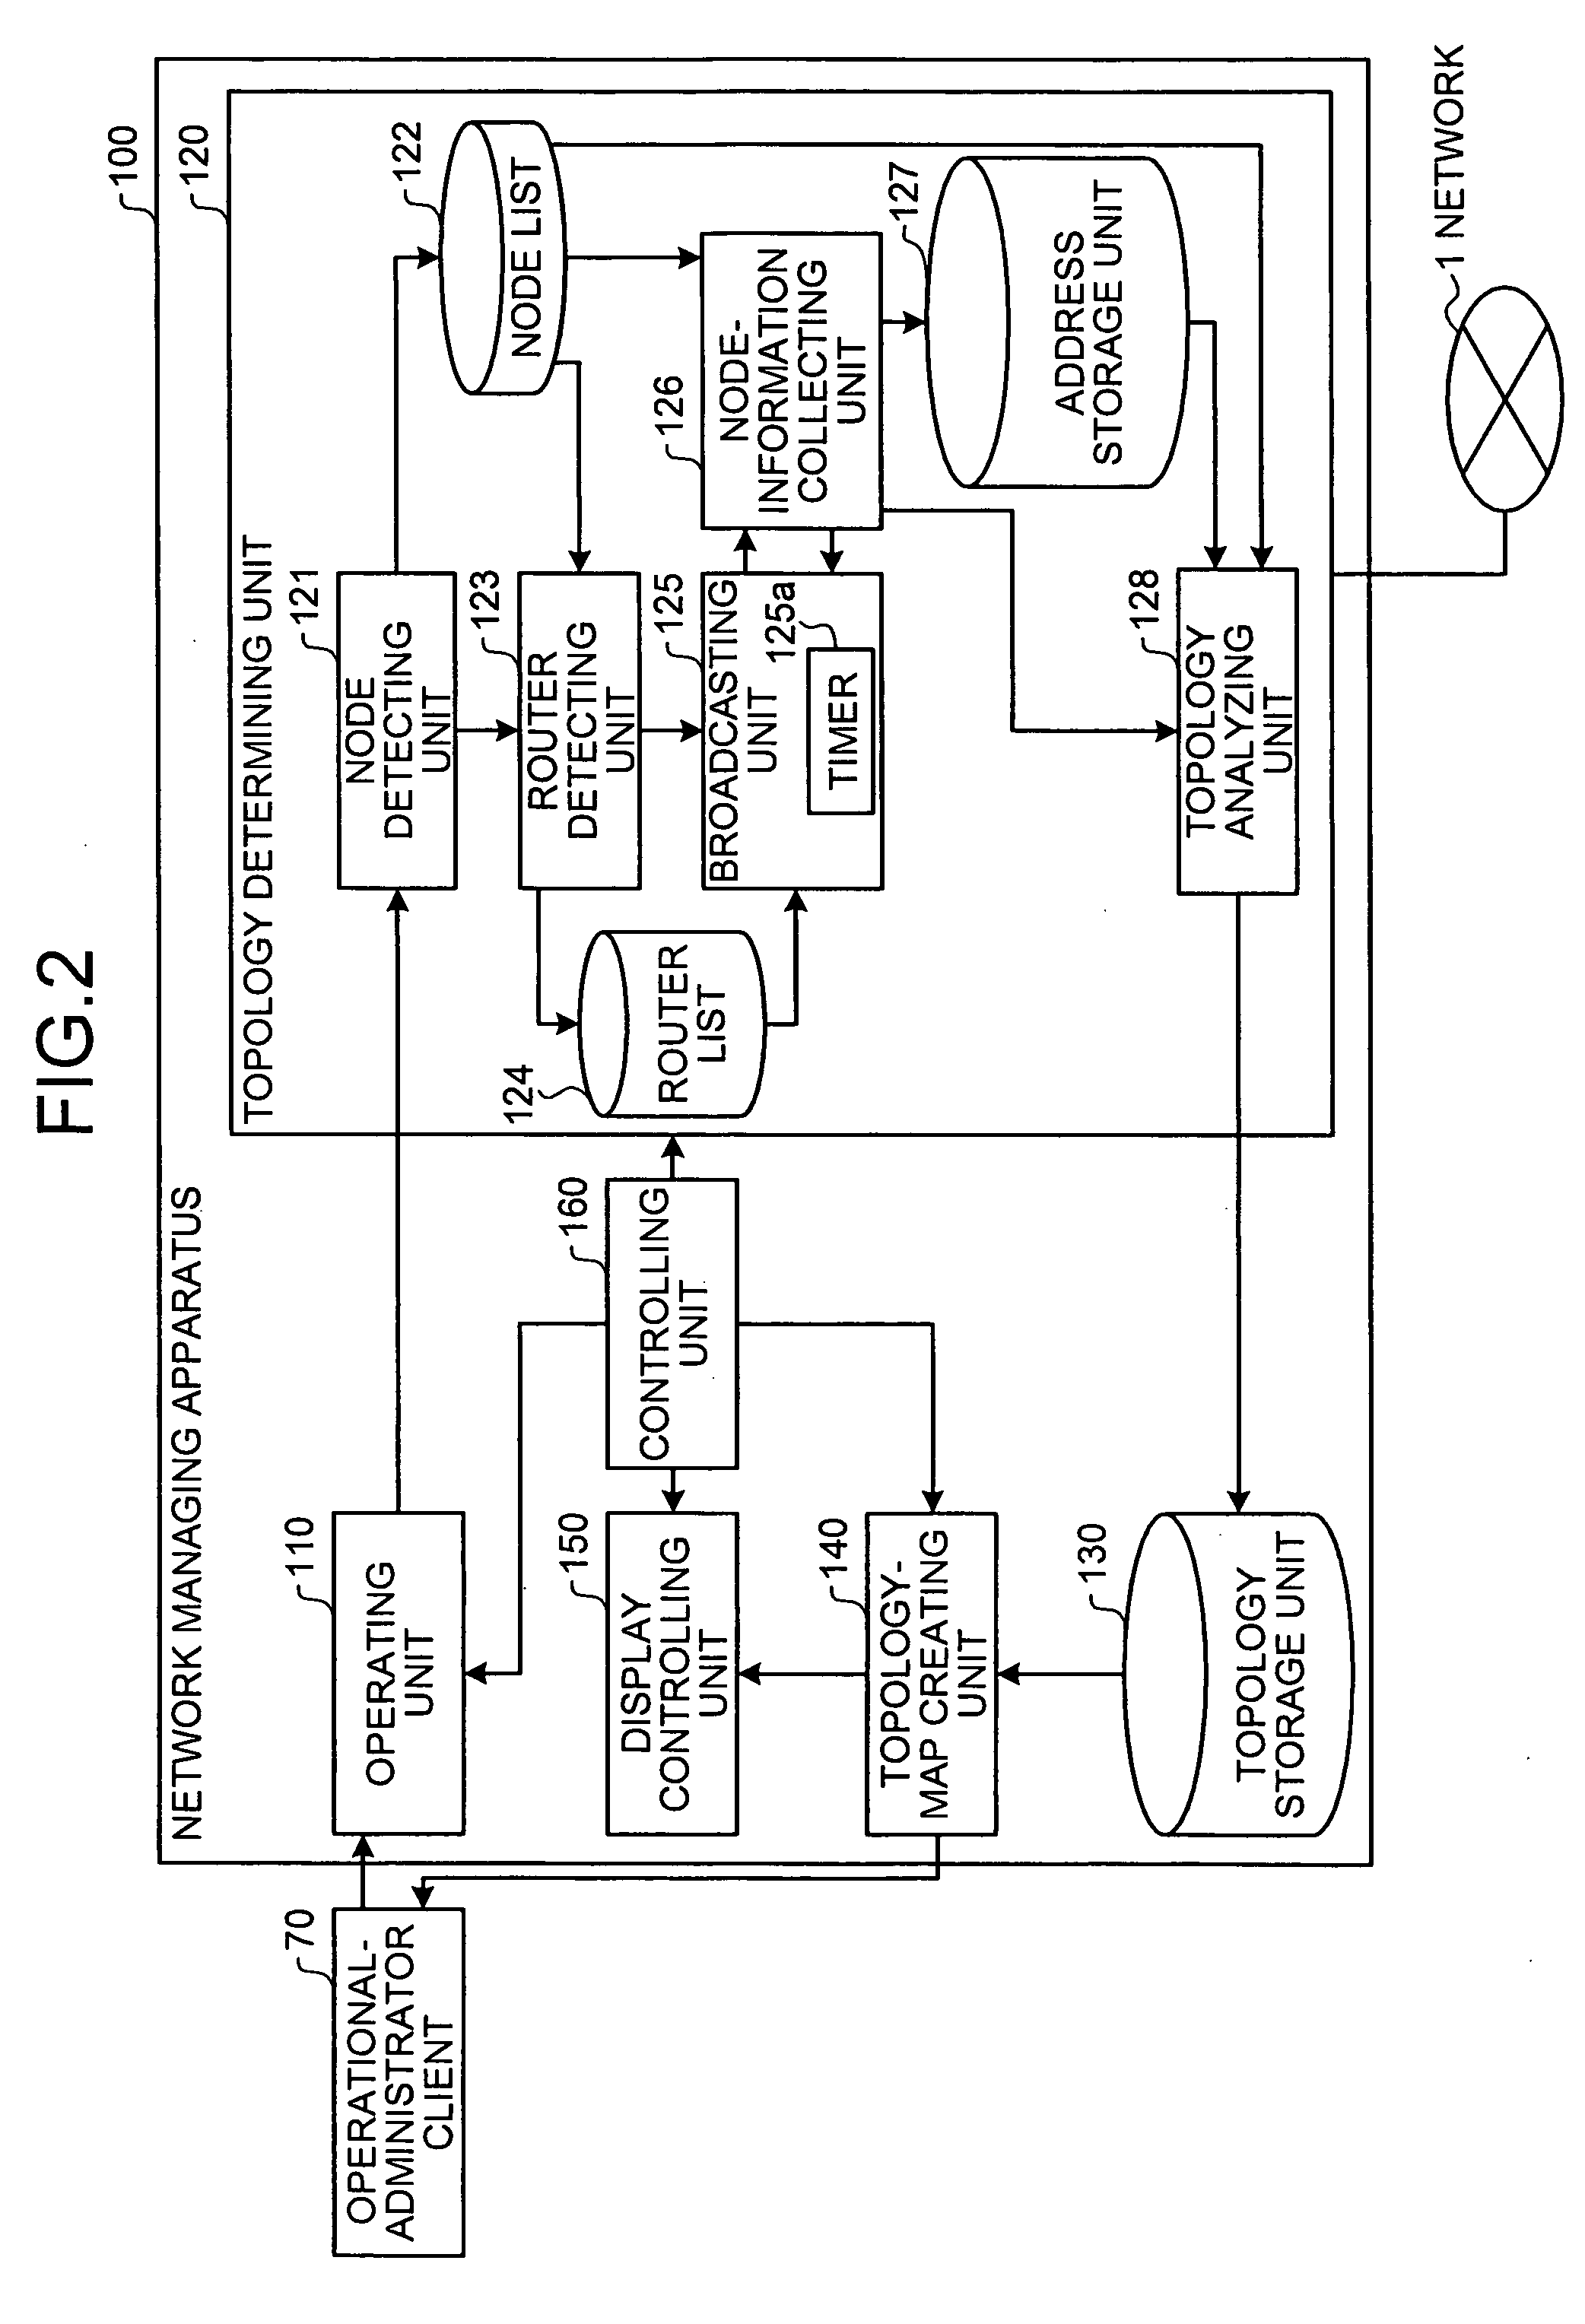 Apparatus, method, and computer product for topology-information collection